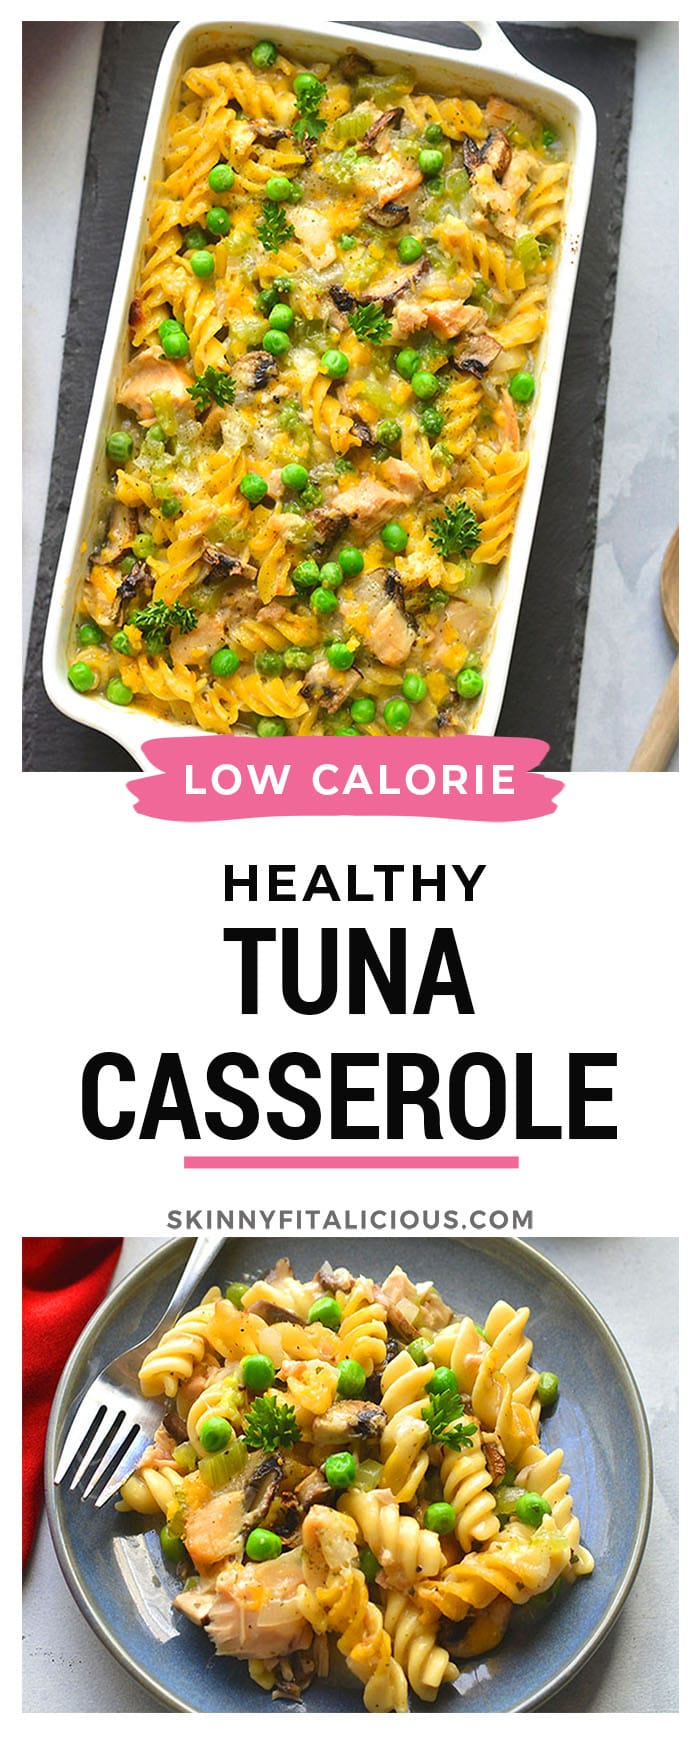 Healthy Tuna Noodle Casserole made with low calorie and dairy free with gluten free pasta for a healthy, high protein tuna casserole meal!